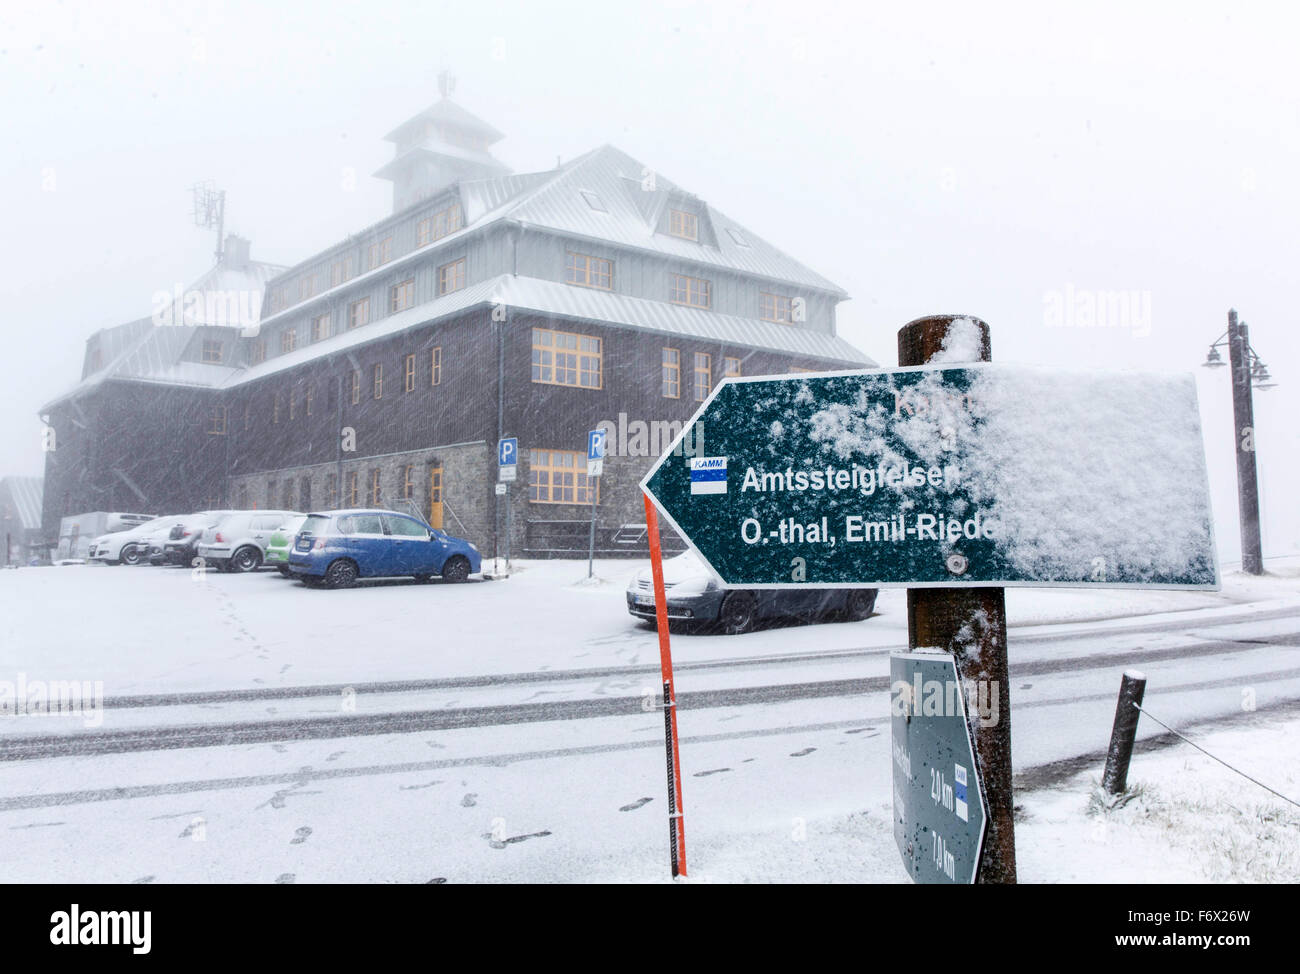 Fichtelberg, Germany. 20th Nov, 2015. The Fichtelberghaus is covered by snow in Fichtelberg, Germany, 20 November 2015. Photo: Bernd Maerz/dpa/Alamy Live News Stock Photo